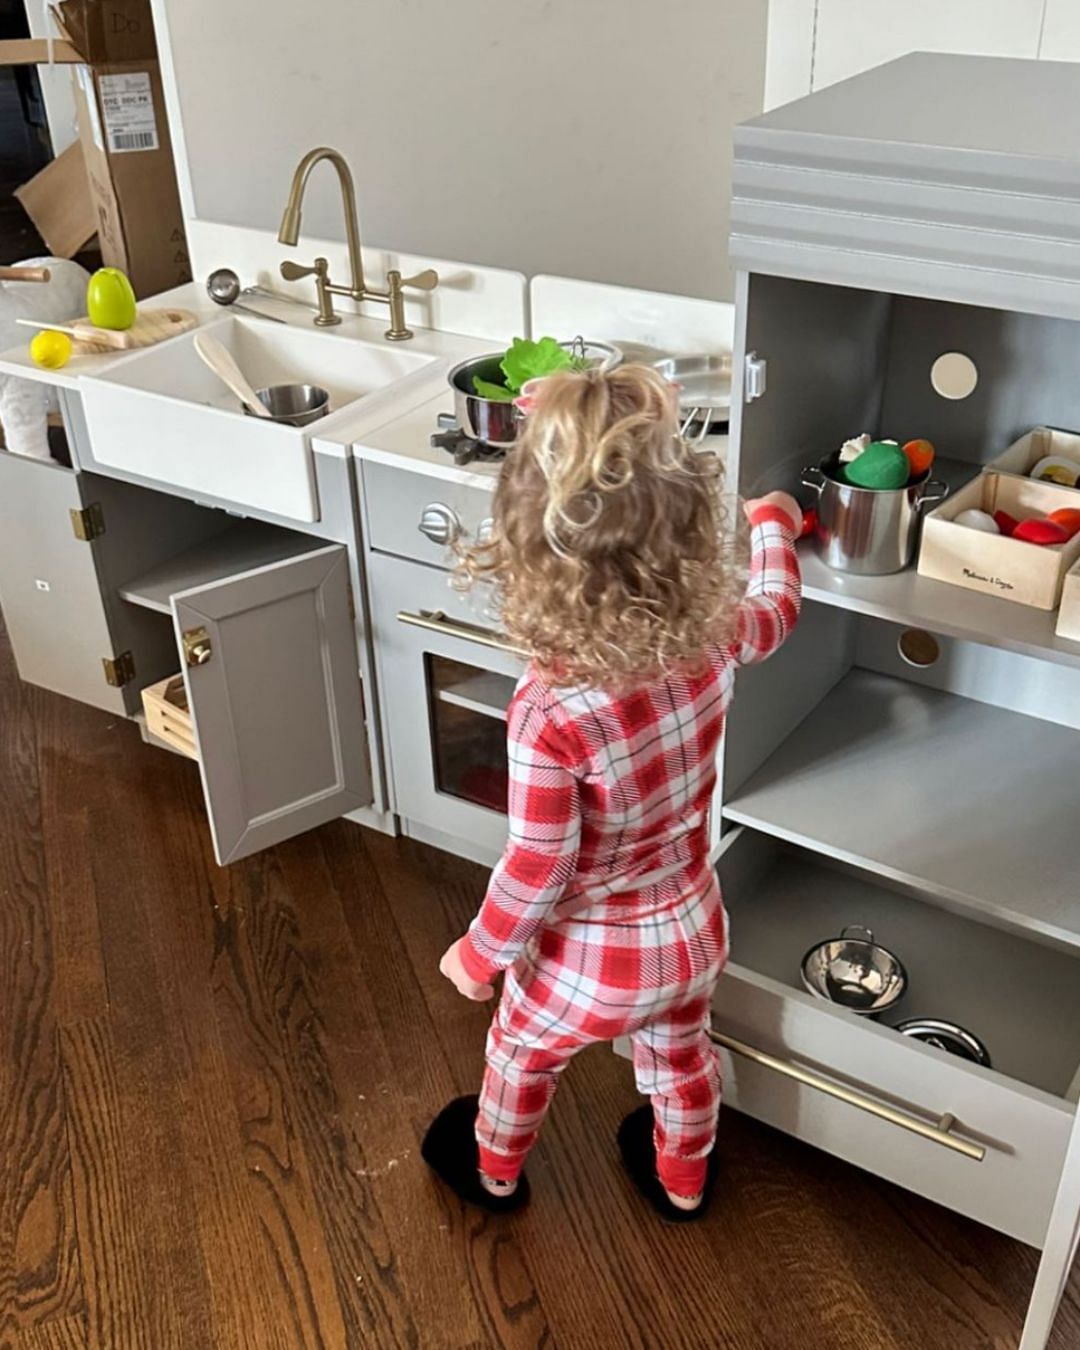 Sterling having fun in her new kitchen. Source: Brittany Mahomes&#039; IG